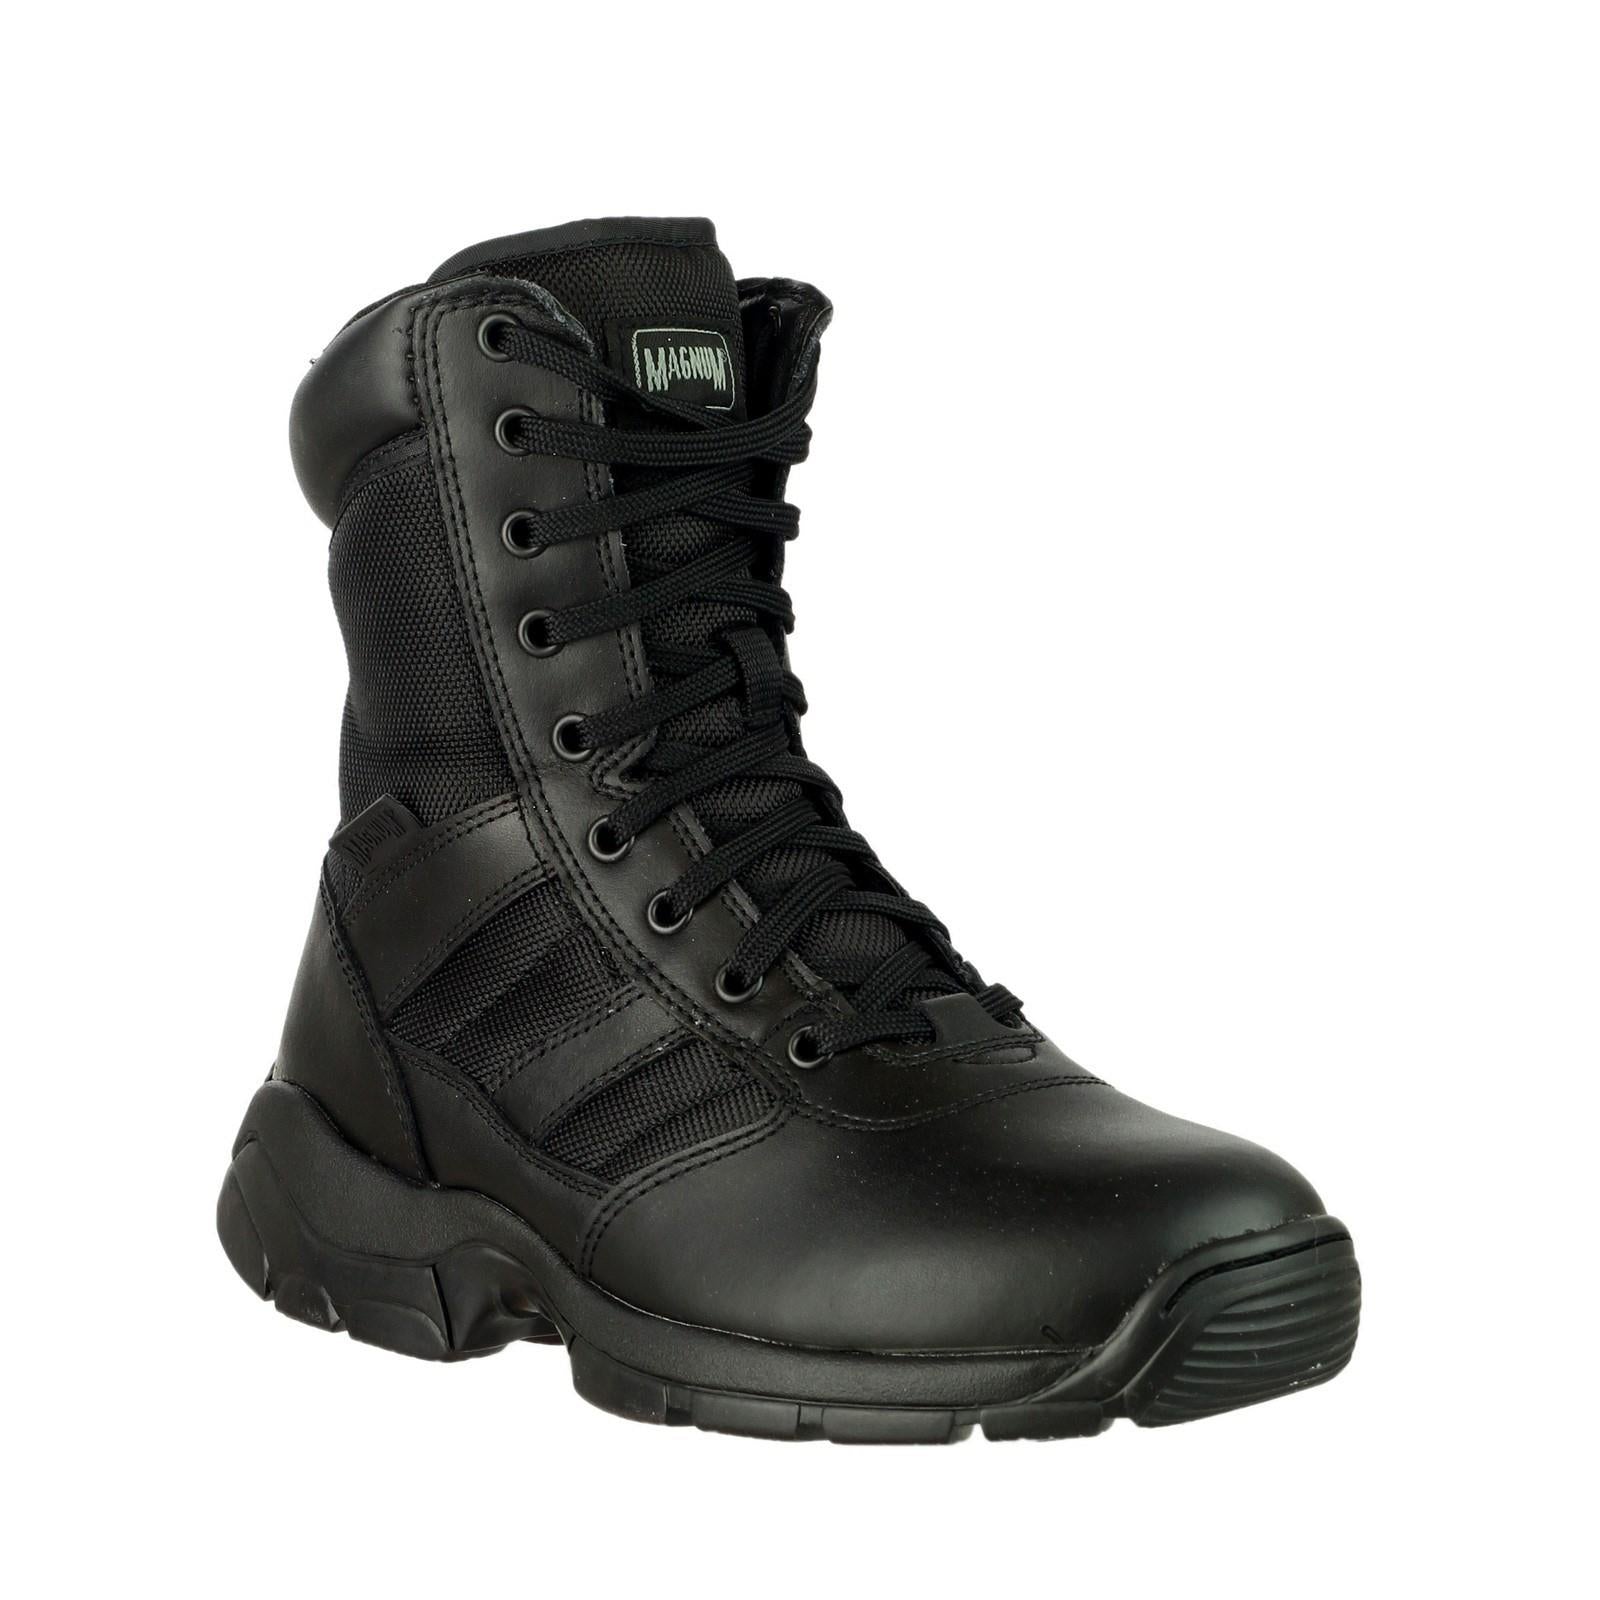 Magnum Panther black side-zip 8" combat cadet security non-safety boot #M800339